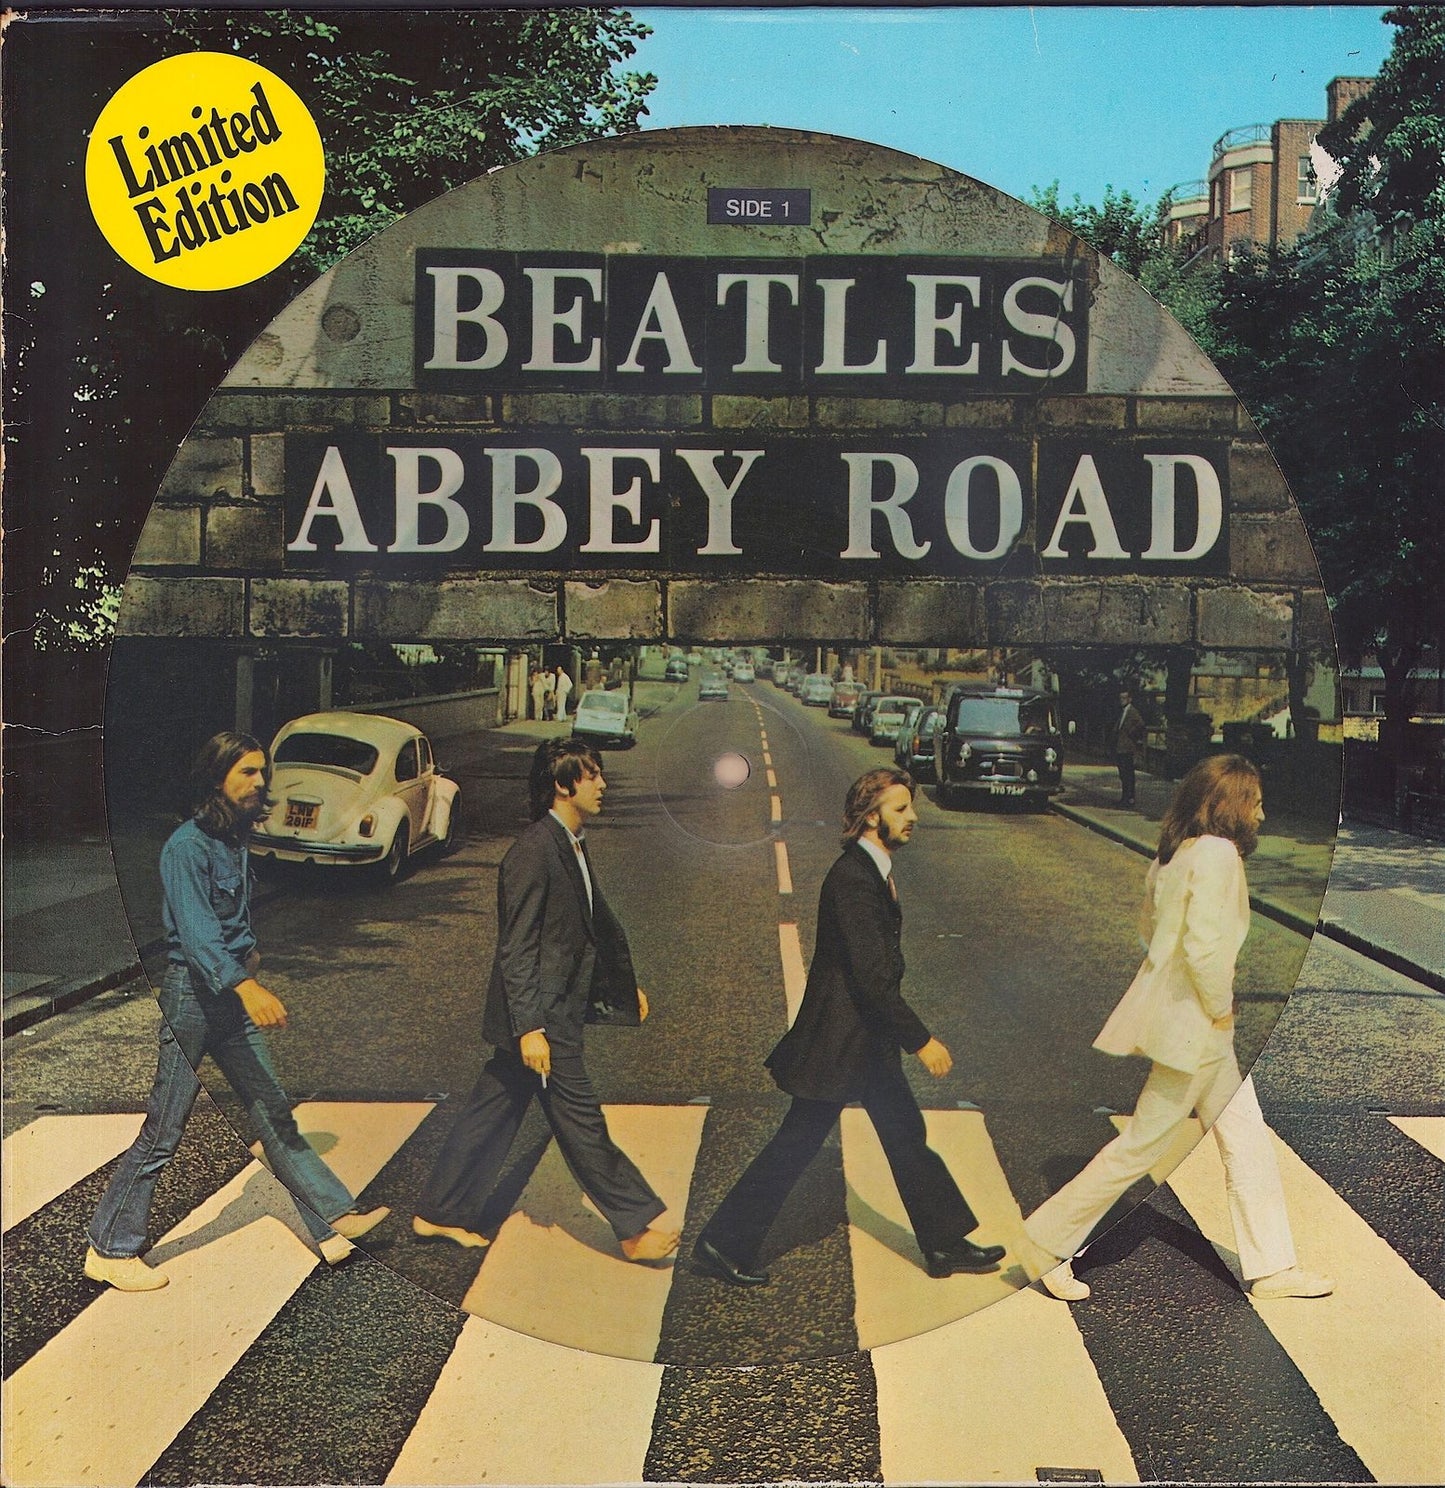 The Beatles - Abbey Road (Vinyl LP Picture Disc) Limited Edition